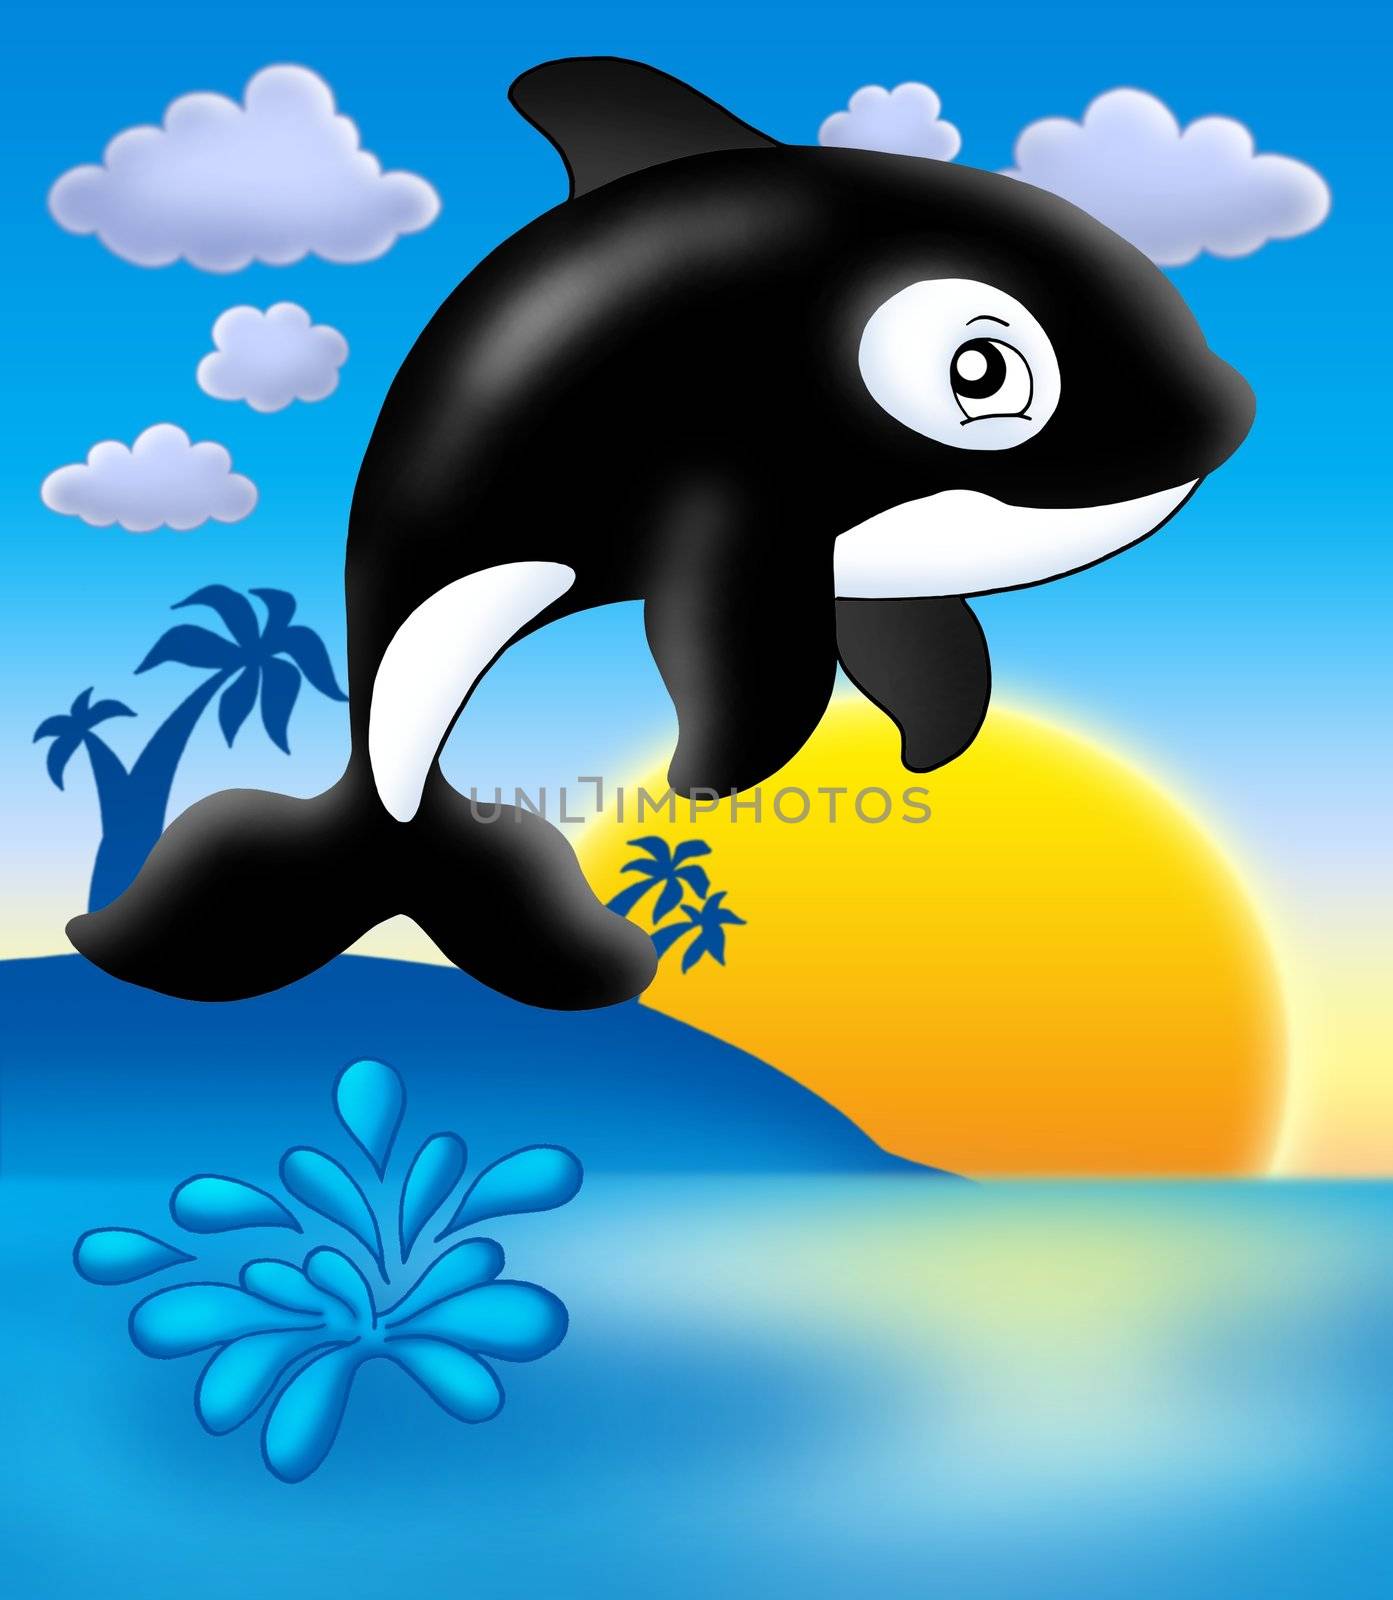 Killer whale with sunset by clairev